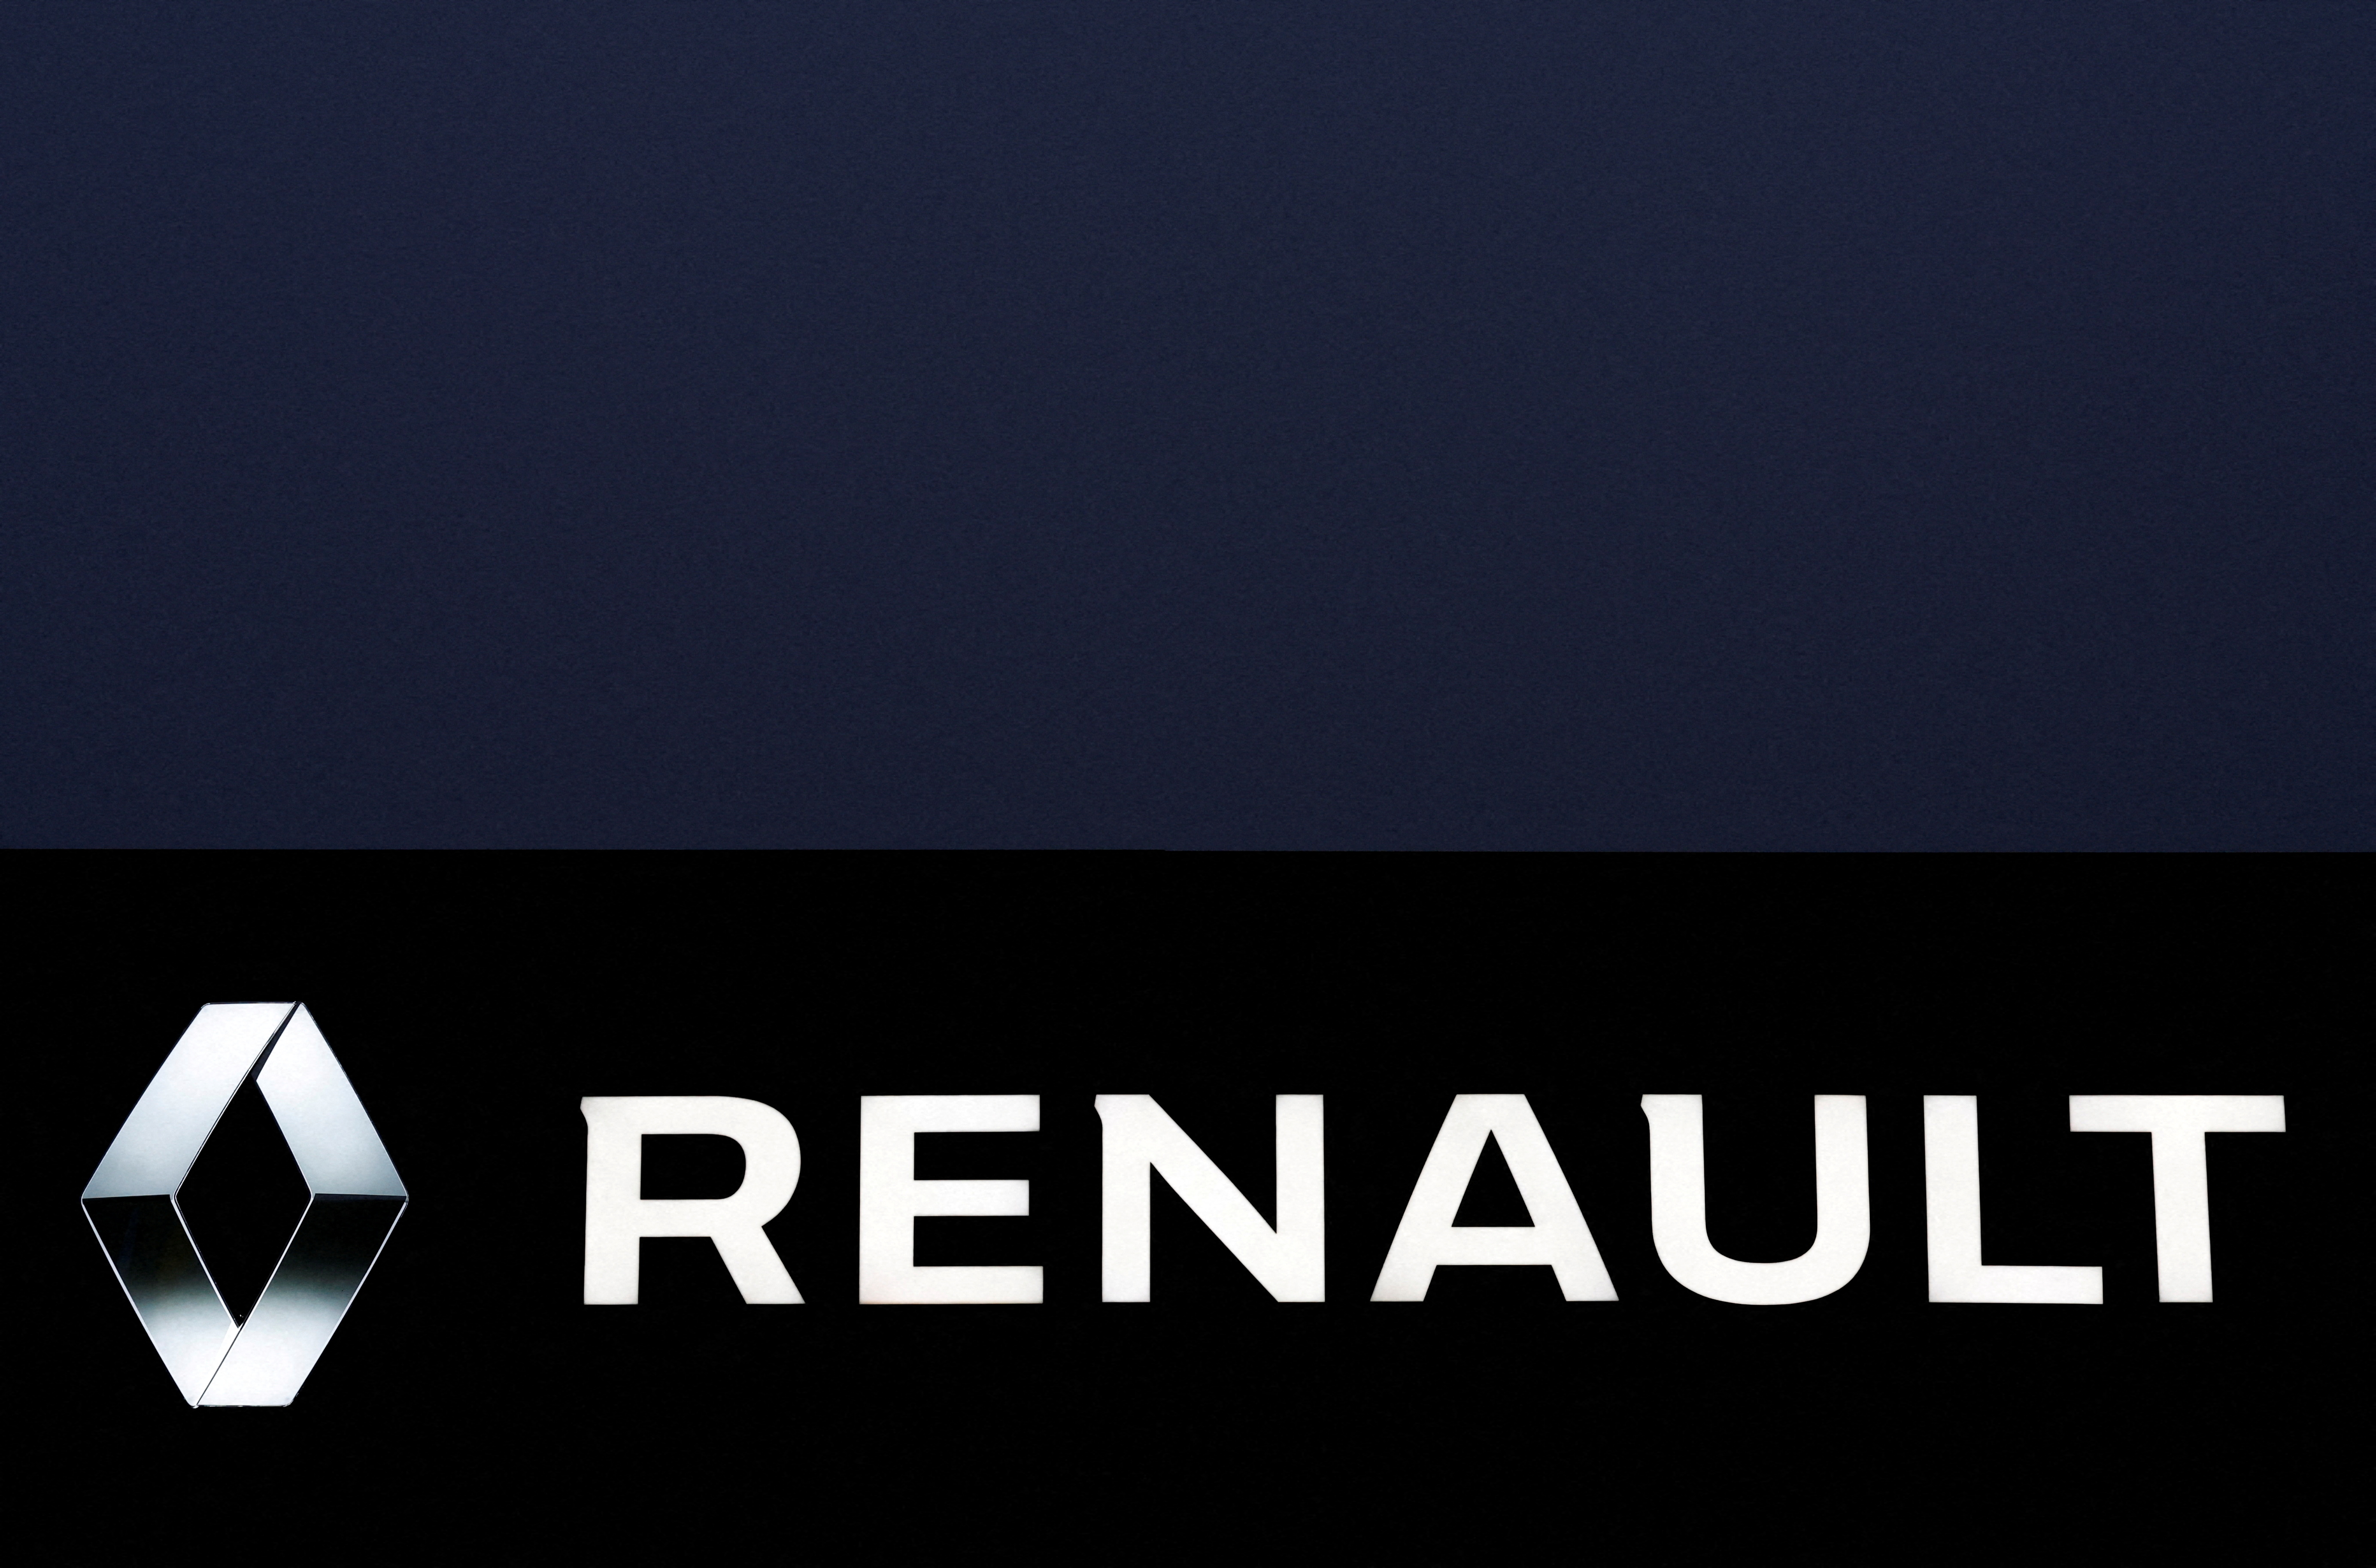 The logo of Renault carmaker is pictured at a dealership in Vertou, near Nantes, France, January 17, 2022. REUTERS/Stephane Mahe